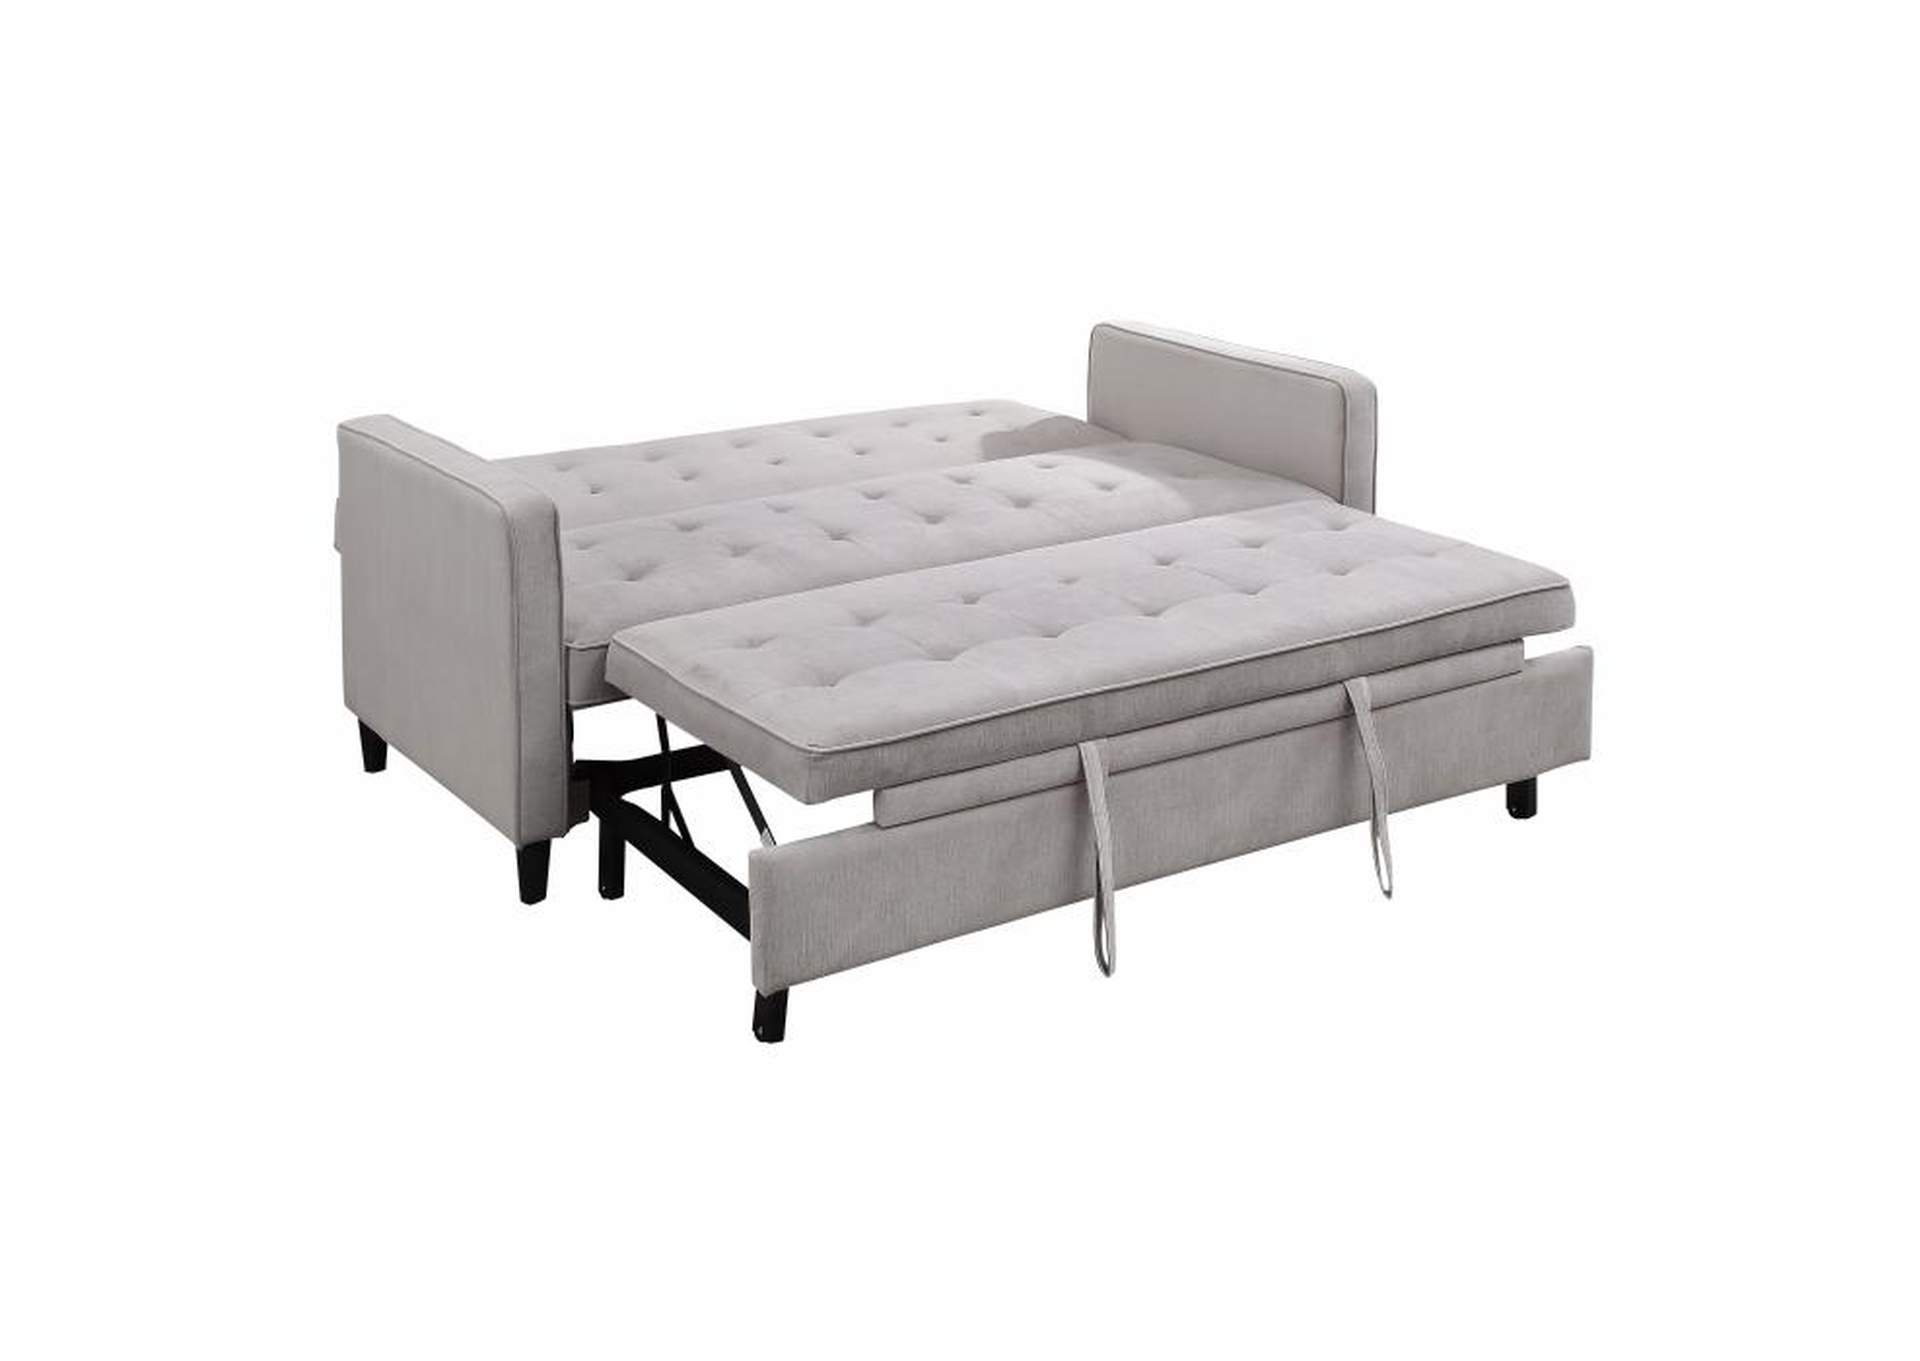 Strader Convertible Studio Sofa with Pull-out Bed,Homelegance